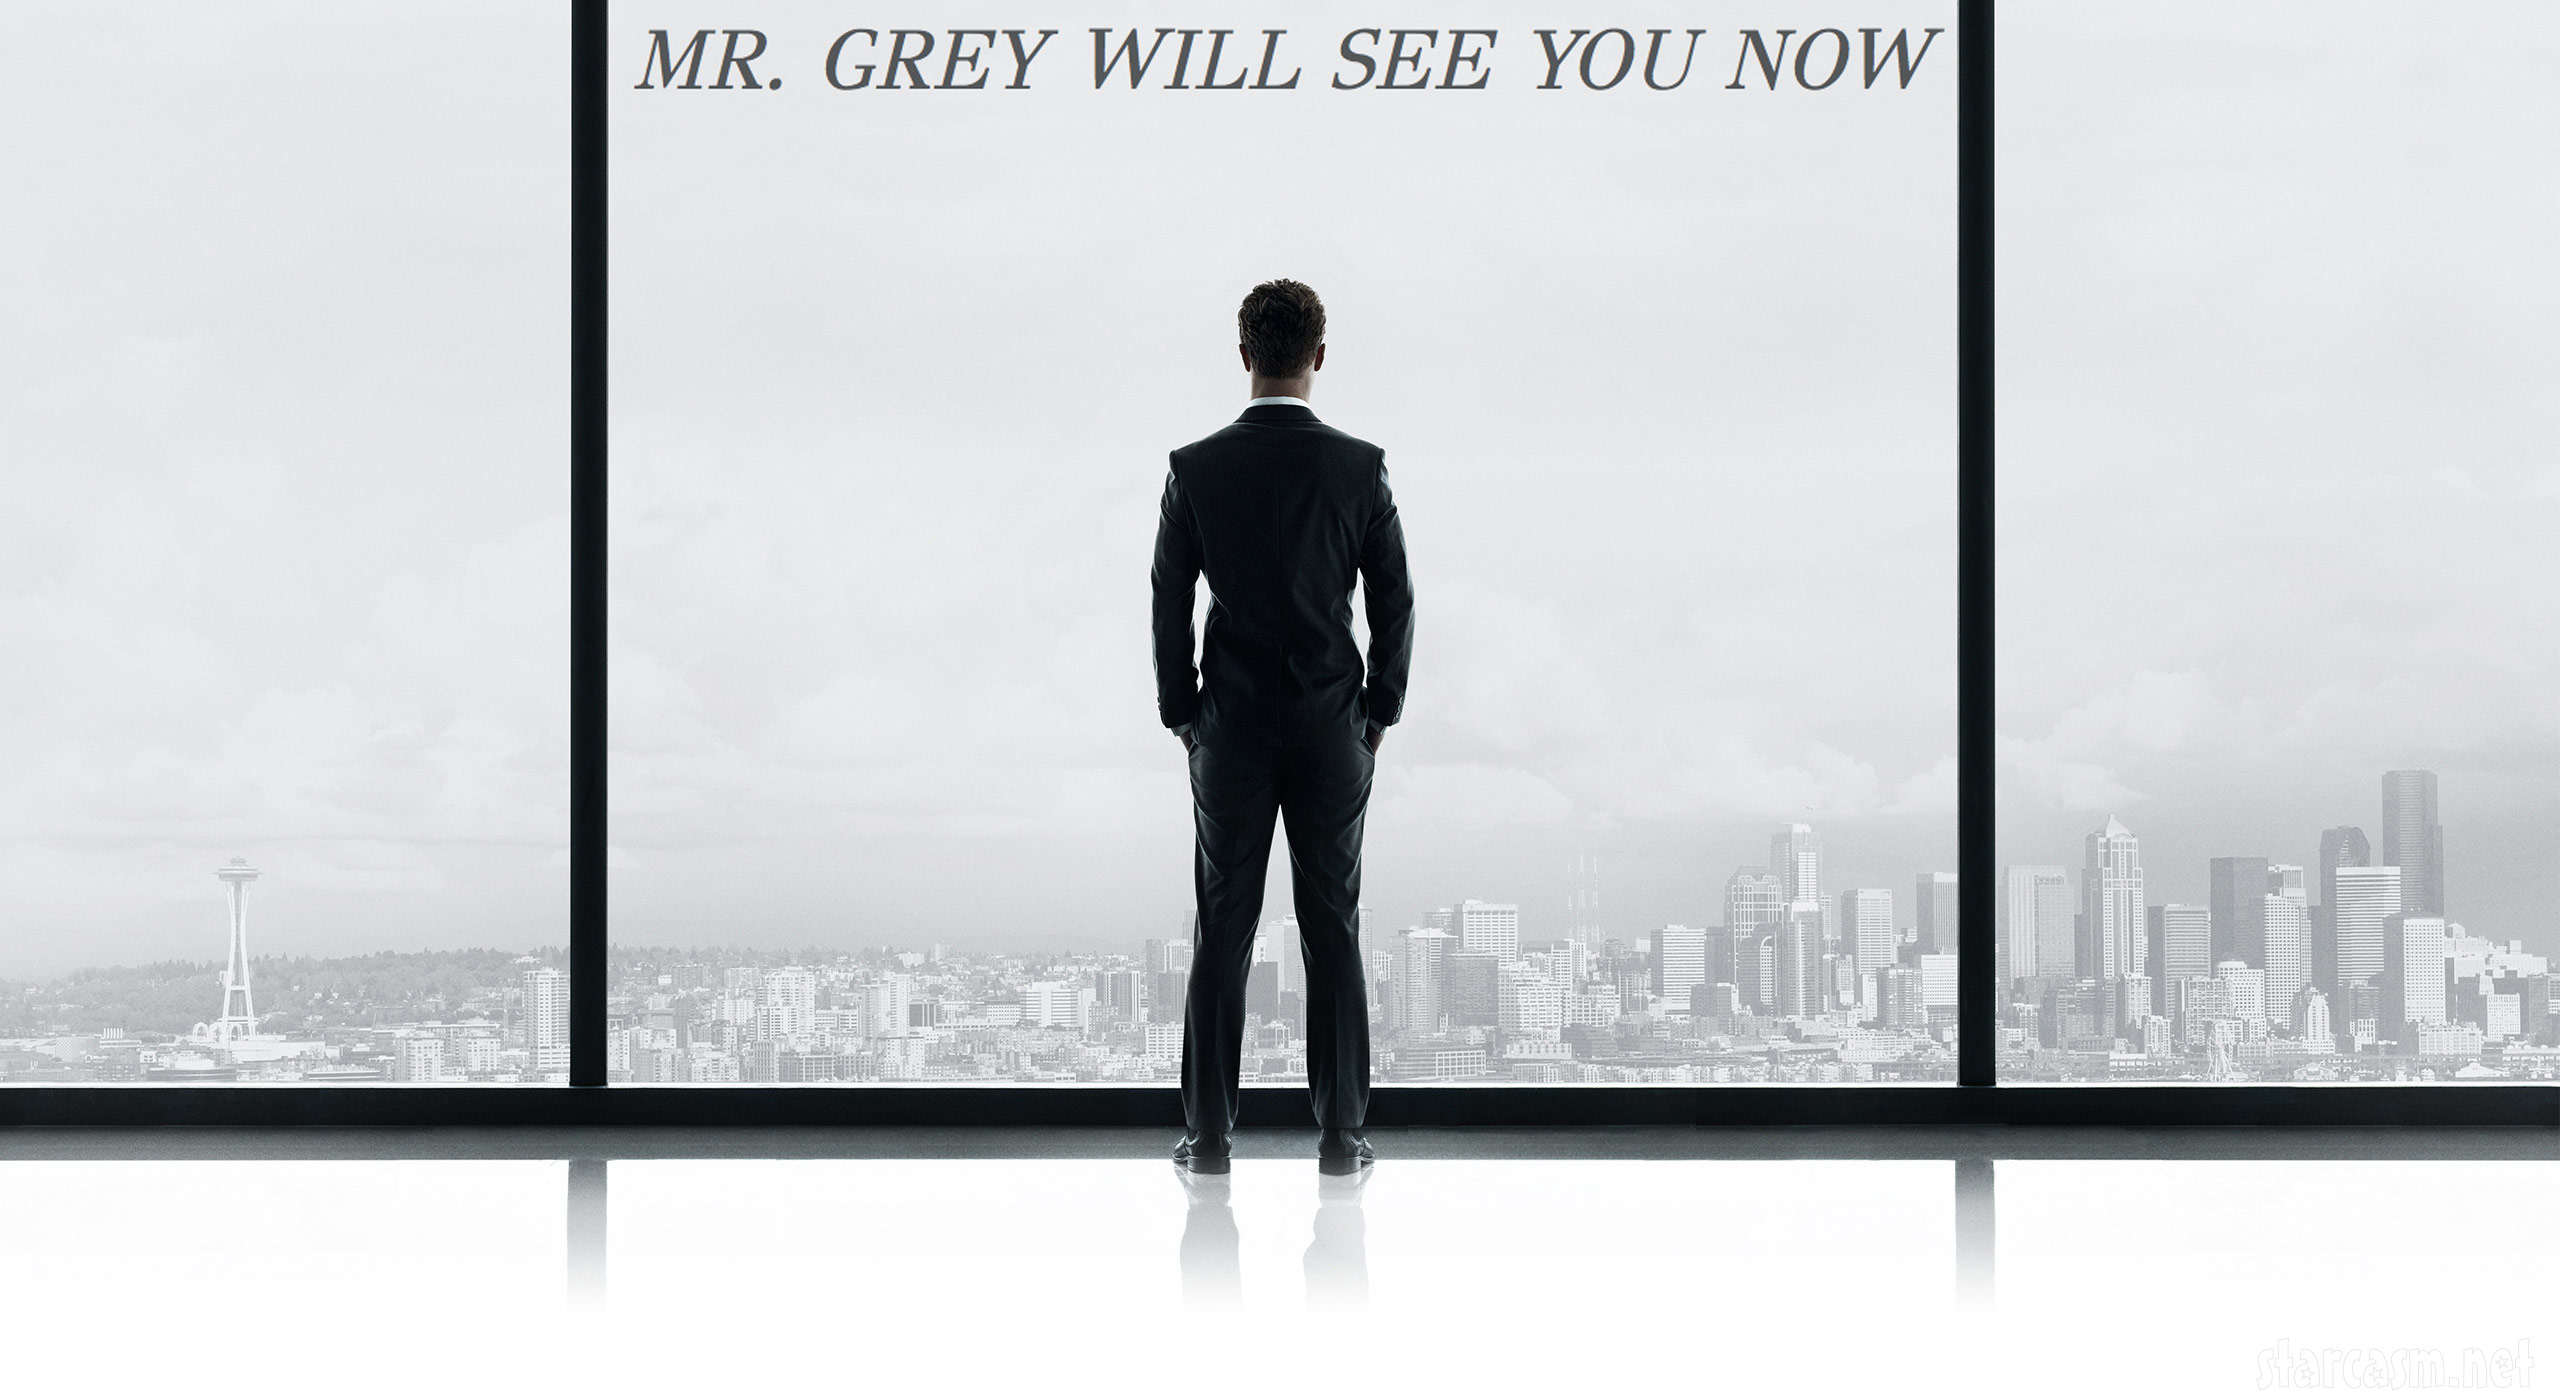 Mr. Grey will see you now